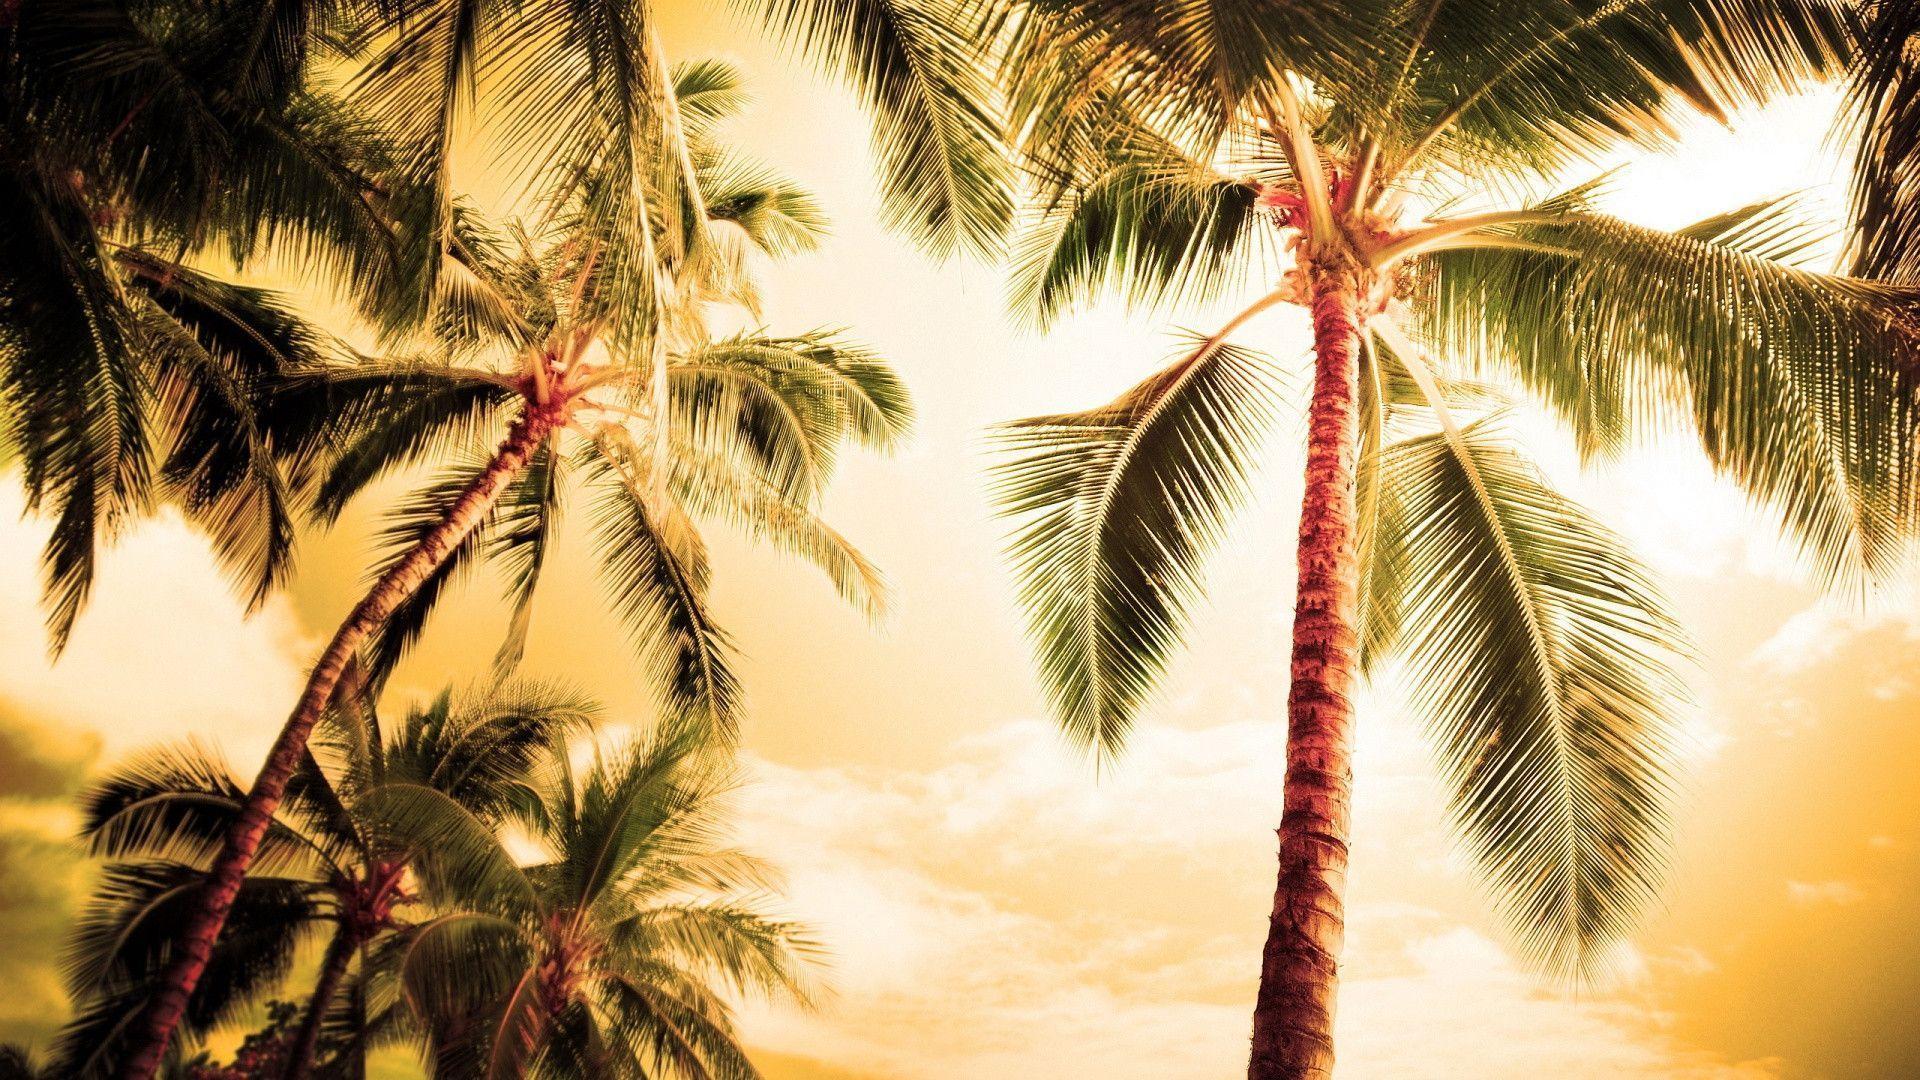 Palm Tree Backgrounds - Wallpaper Cave